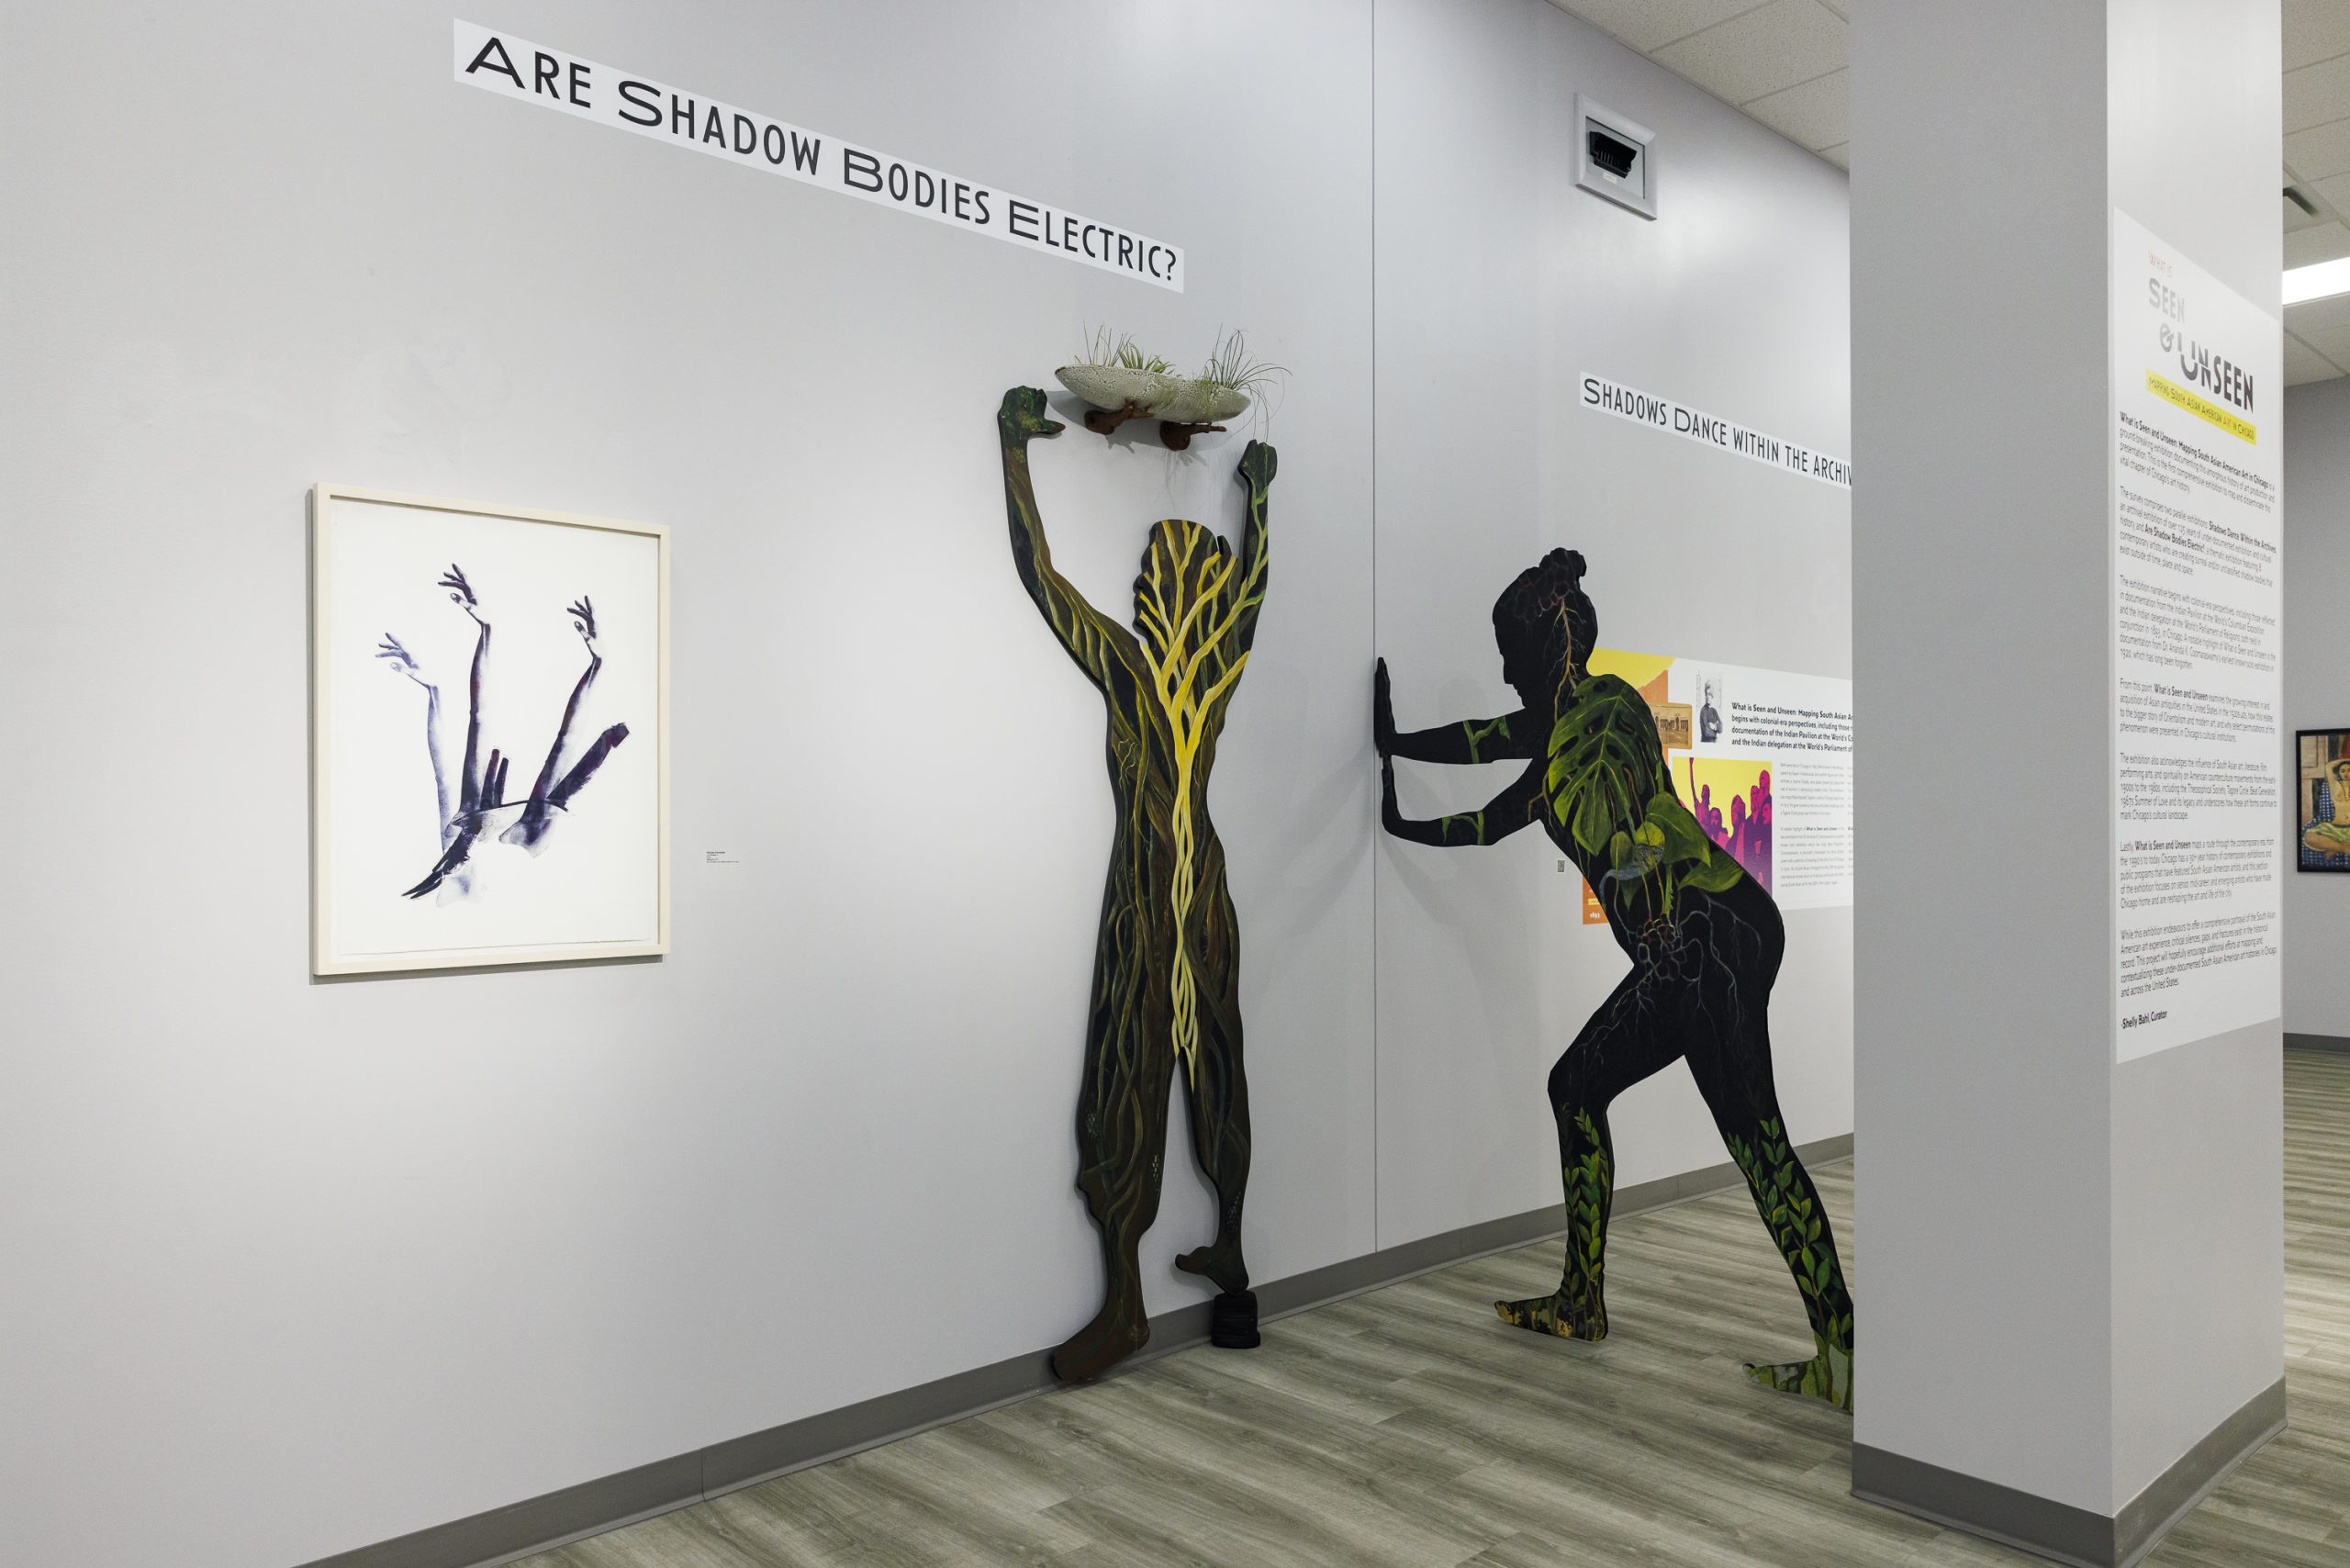 Glimmering Among the Shadows — a review of What is Seen and Unseen: Mapping South Asian American Art in Chicago